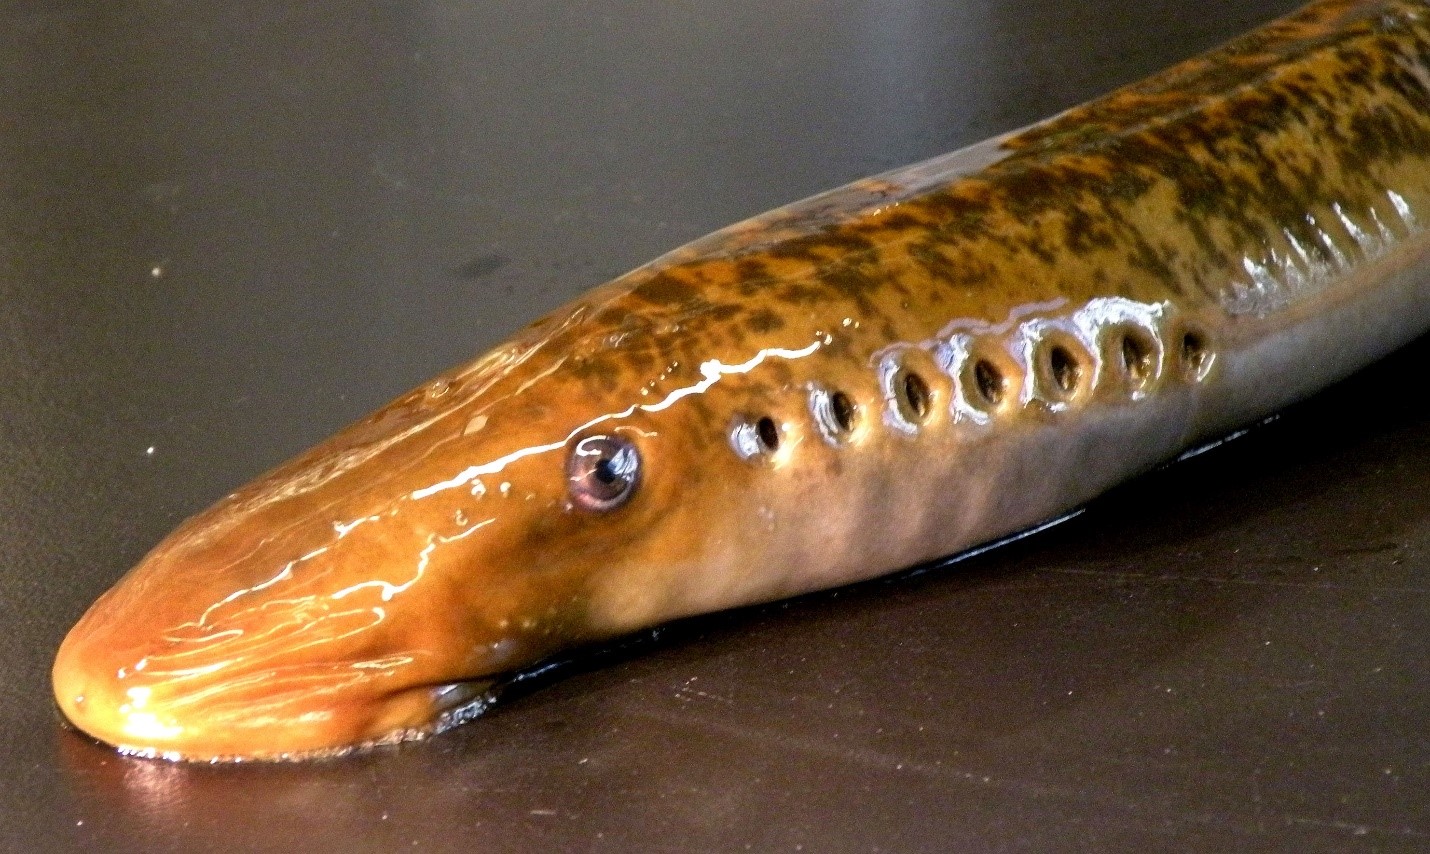 A slimy, brown lamprey with seven gill slits that appear as holes along the side of its body and its suction-like mouth aimed downward against the ground.